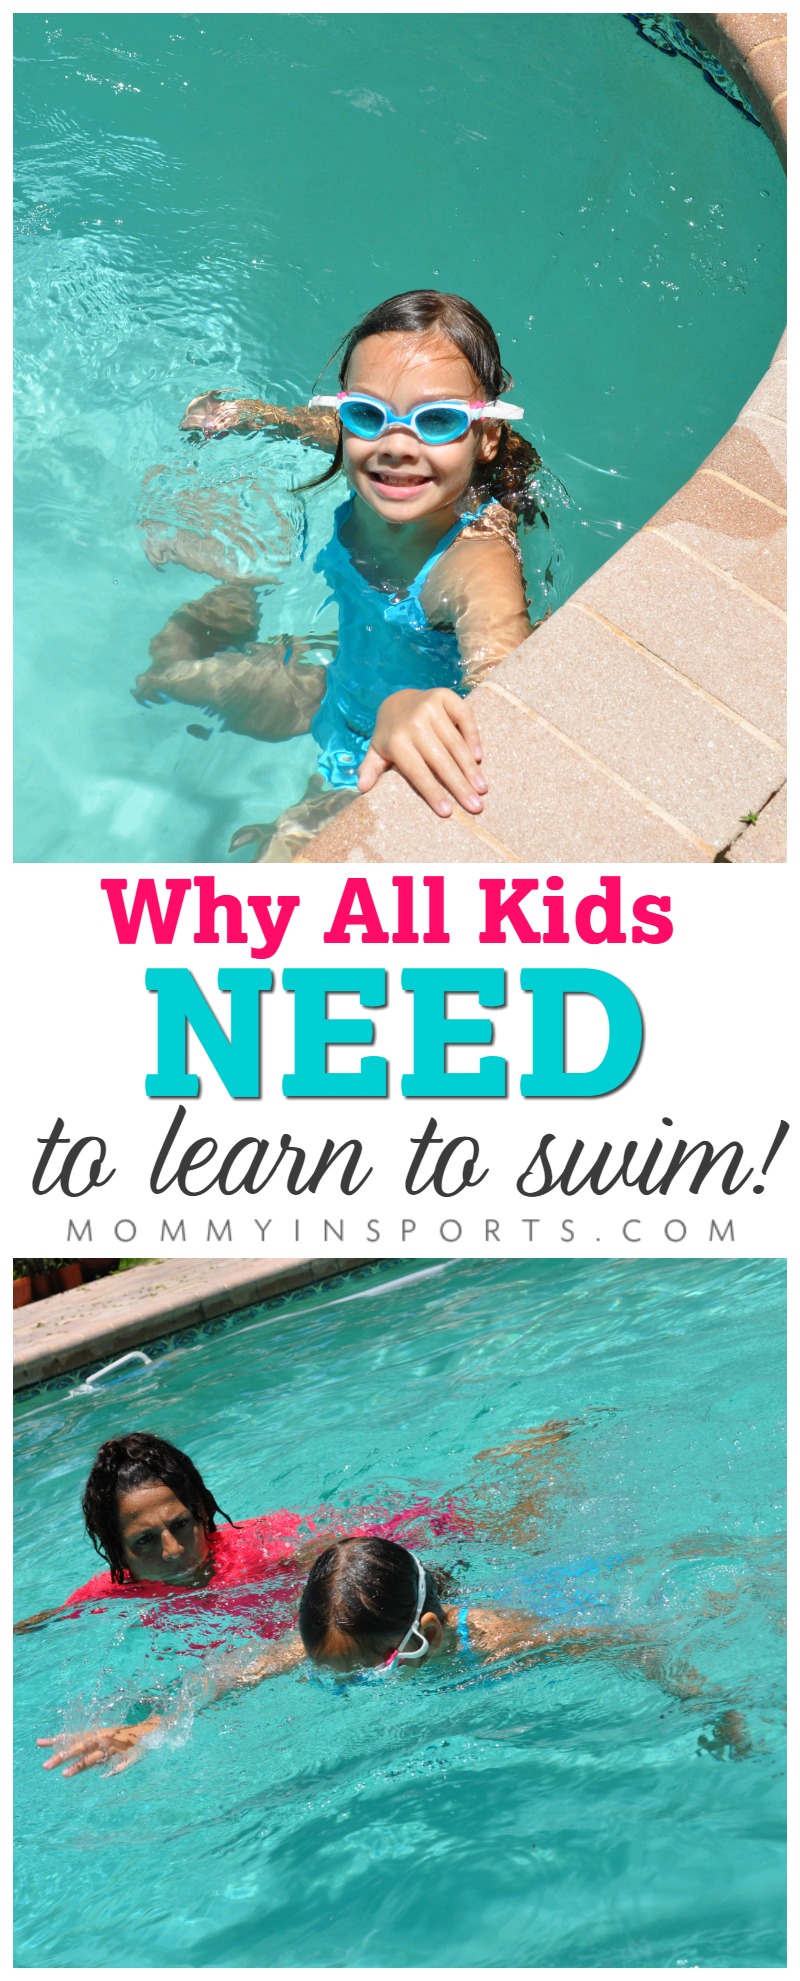 why-all-kids-need-to-learn-to-swim-kristen-hewitt